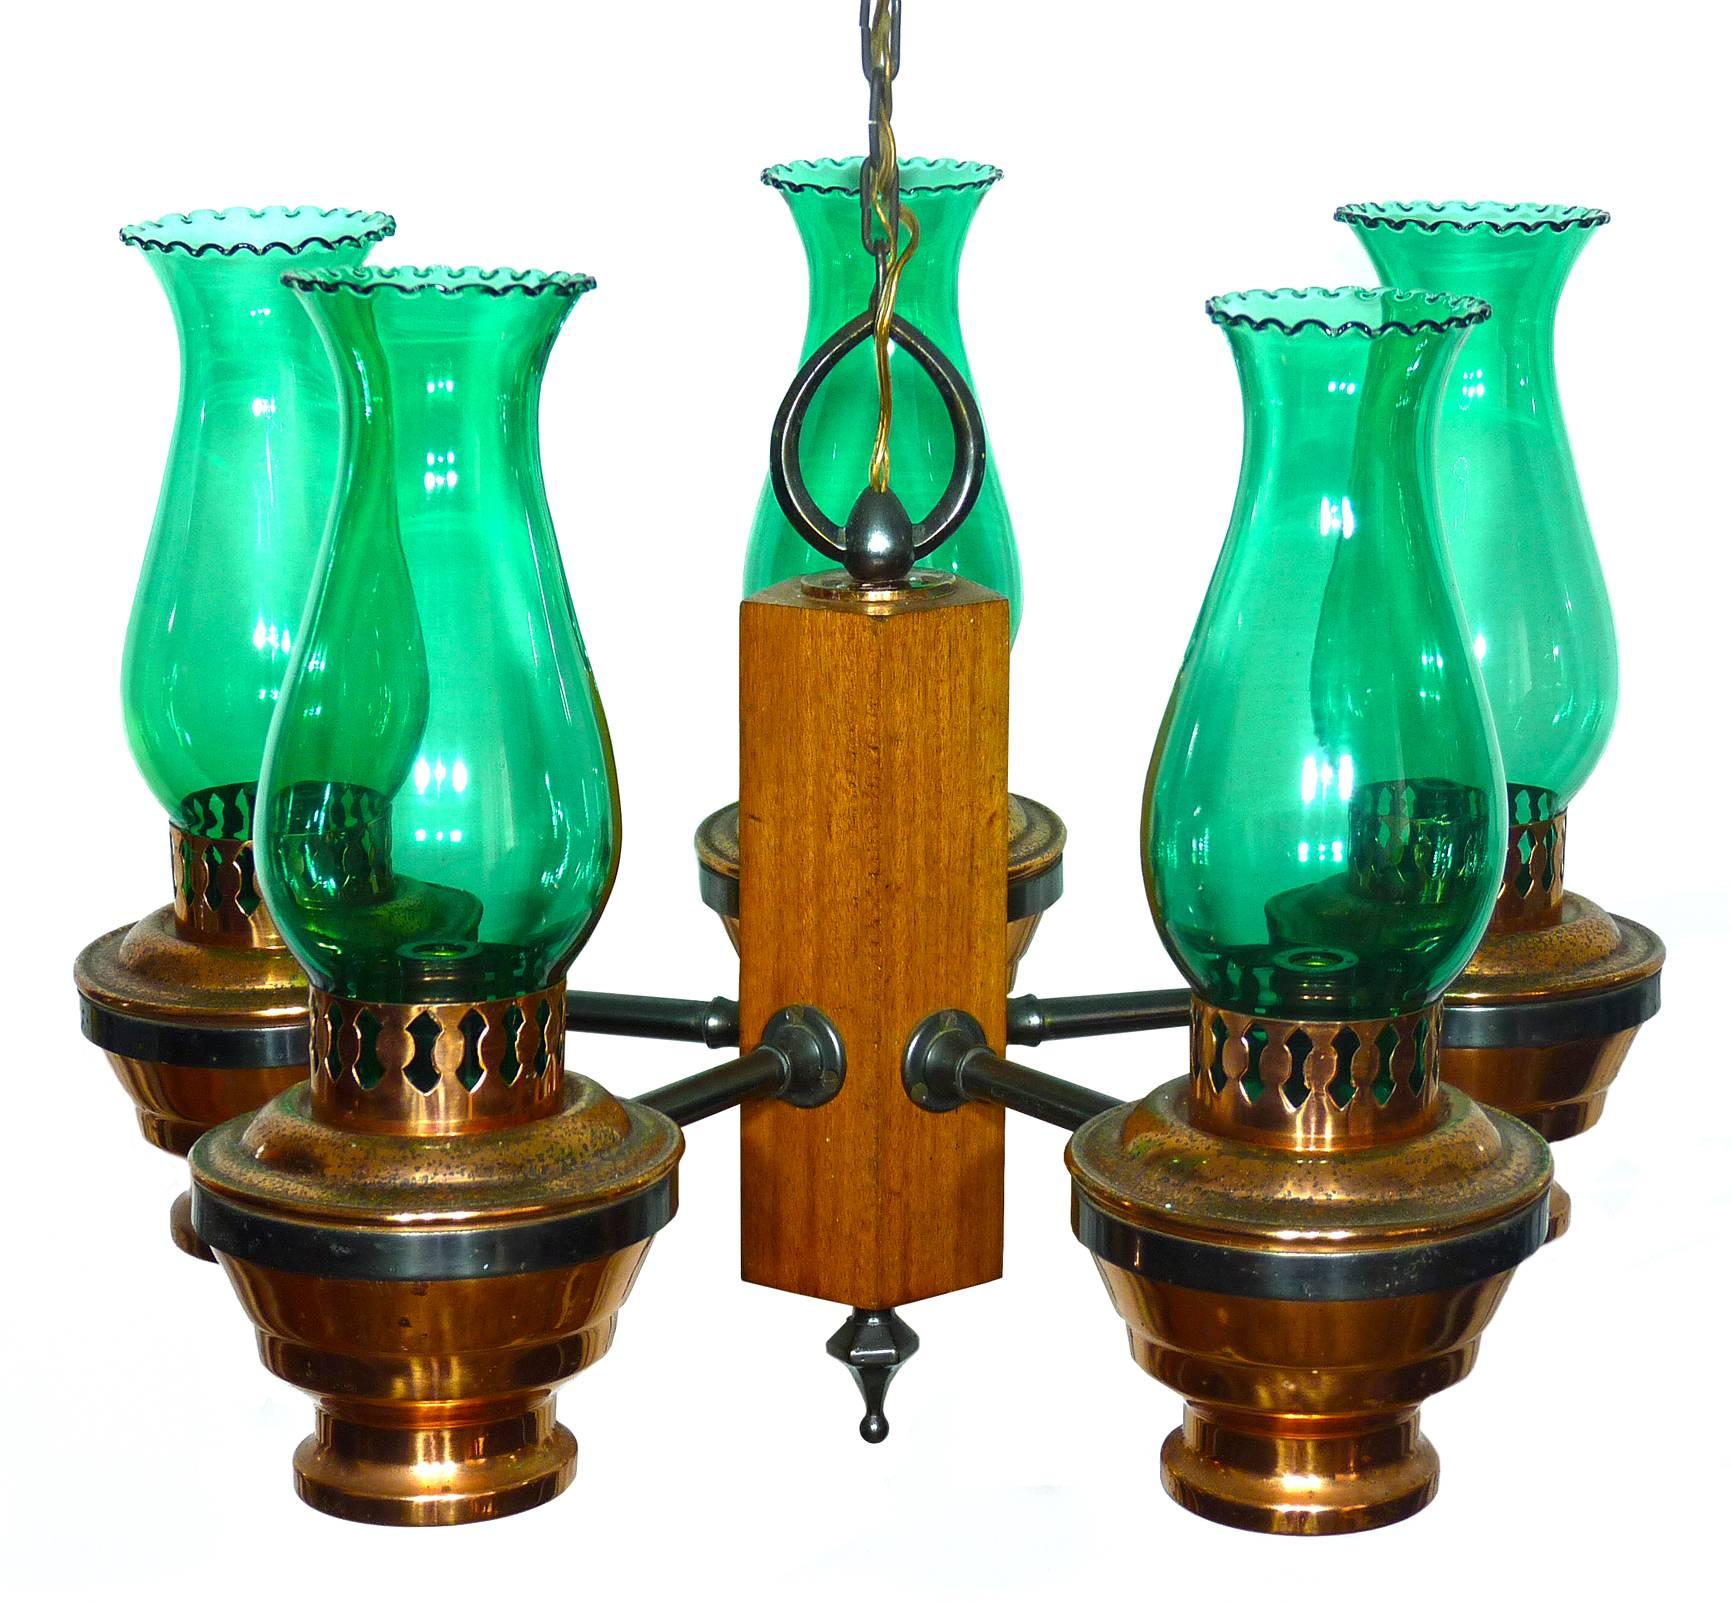 Burnished Colonial French Country Copper and Wood Chandelier Oil Lamp w Green Glass Shades